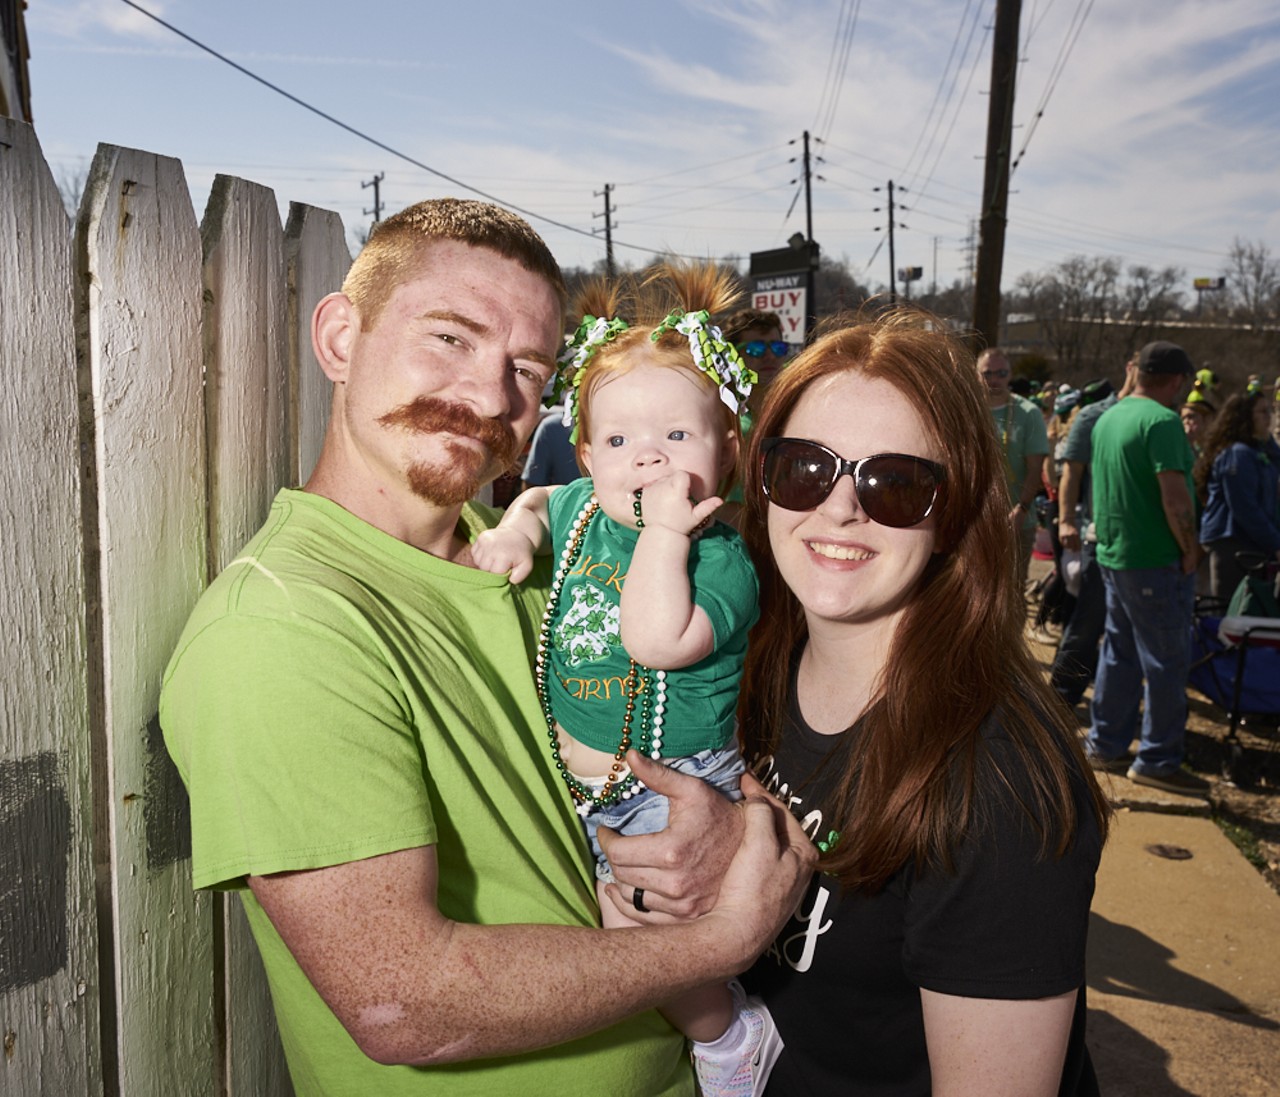 Everything We Saw at St. Patrick's Day in Dogtown [PHOTOS]